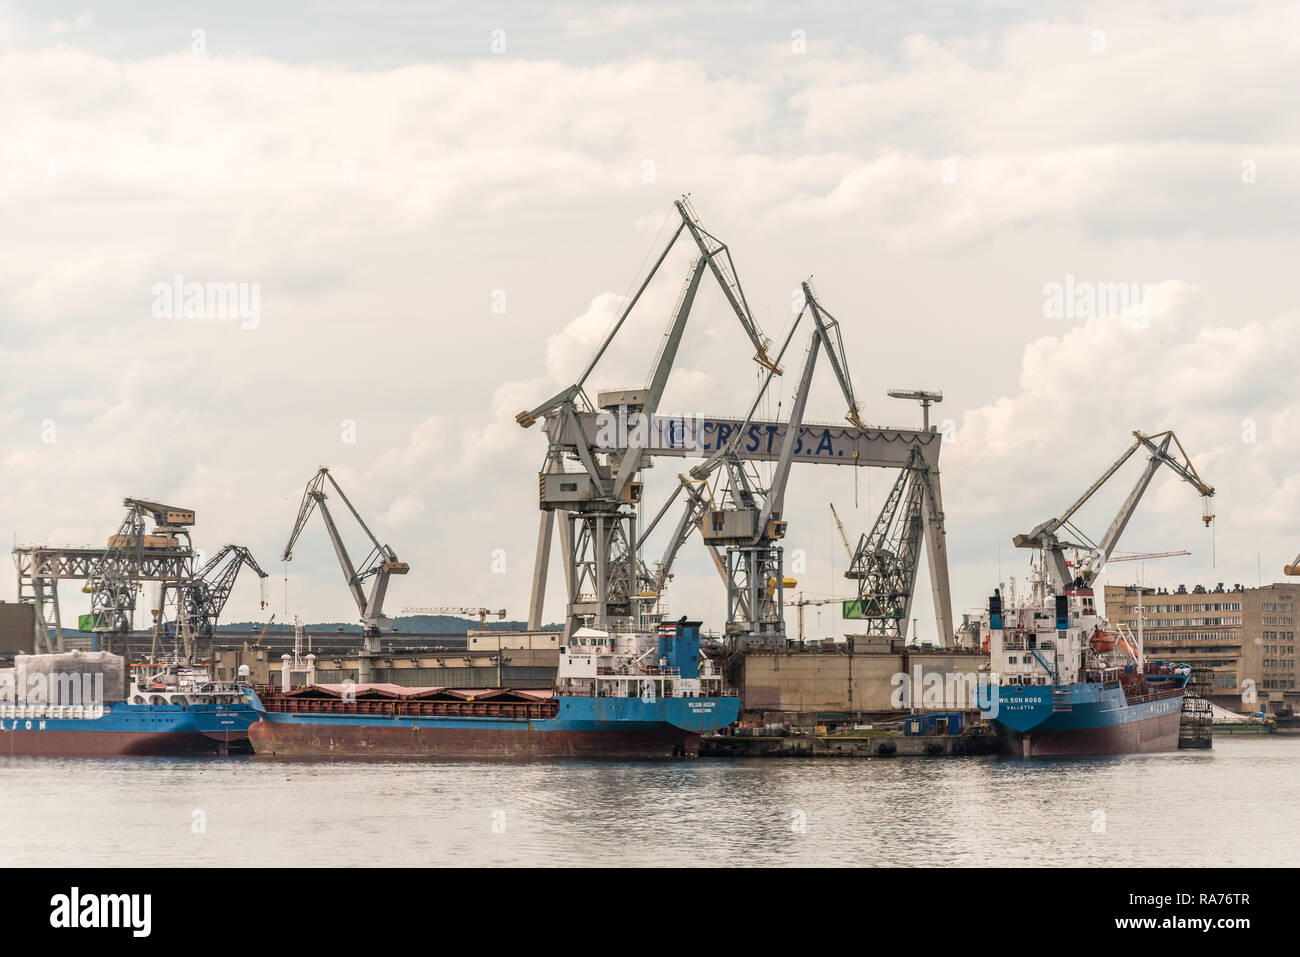 Gdynia, Poland. August 25, 2018: Views from excursion ship around  Gdynia Harbour. Cranes and vessels at wharf Stock Photo